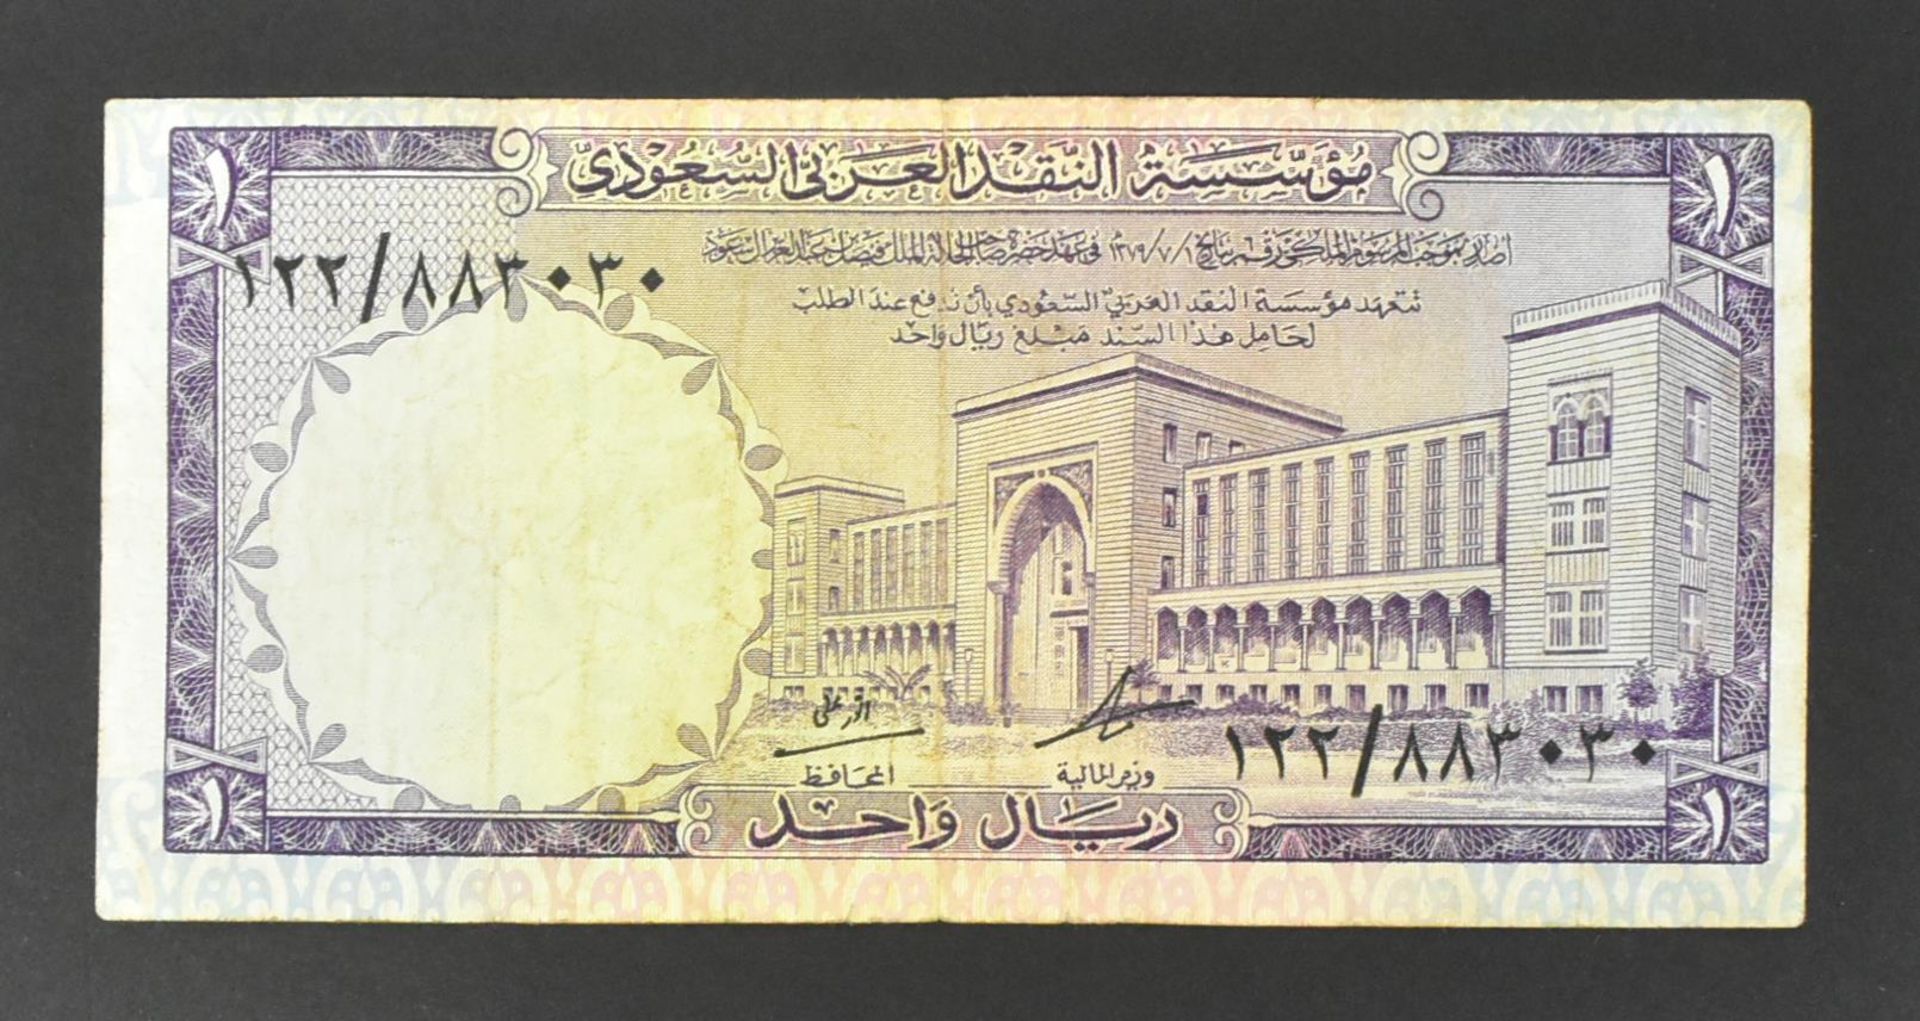 COLLECTION OF INTERNATIONAL UNCIRCULATED BANK NOTES - OMAN - Image 17 of 51